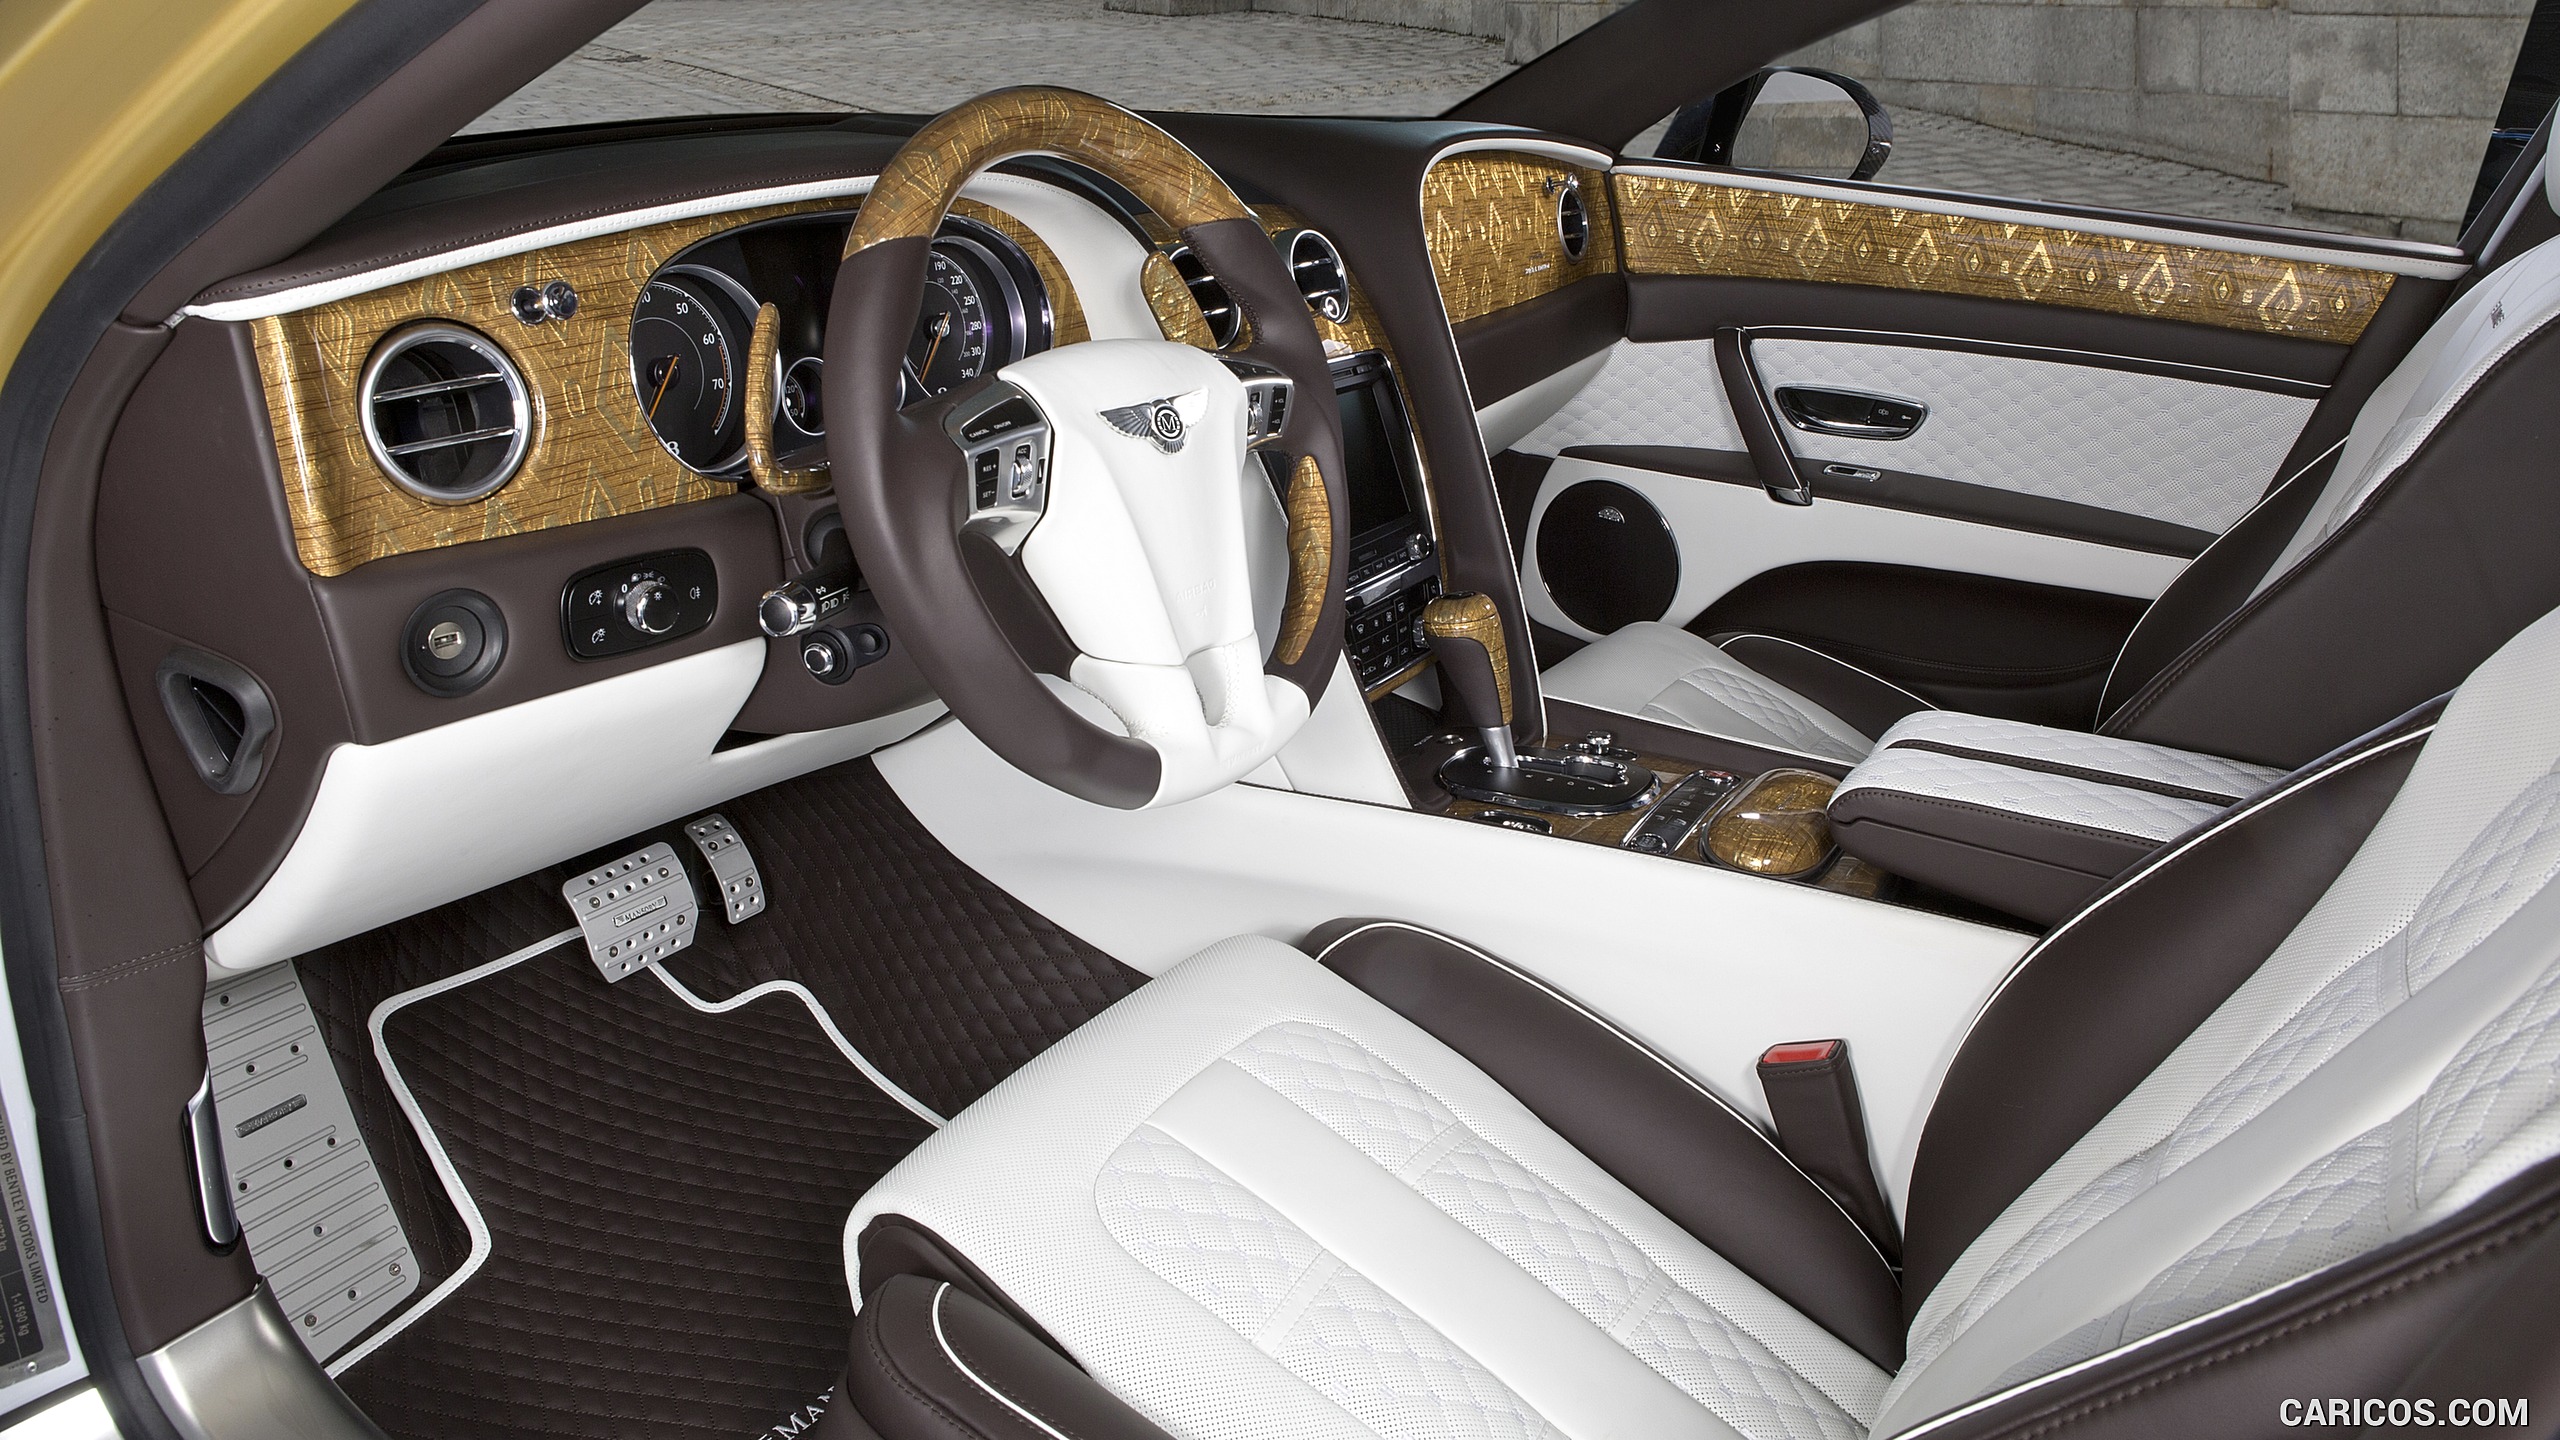 2016 MANSORY Bentley Flying Spur - Interior, #6 of 7